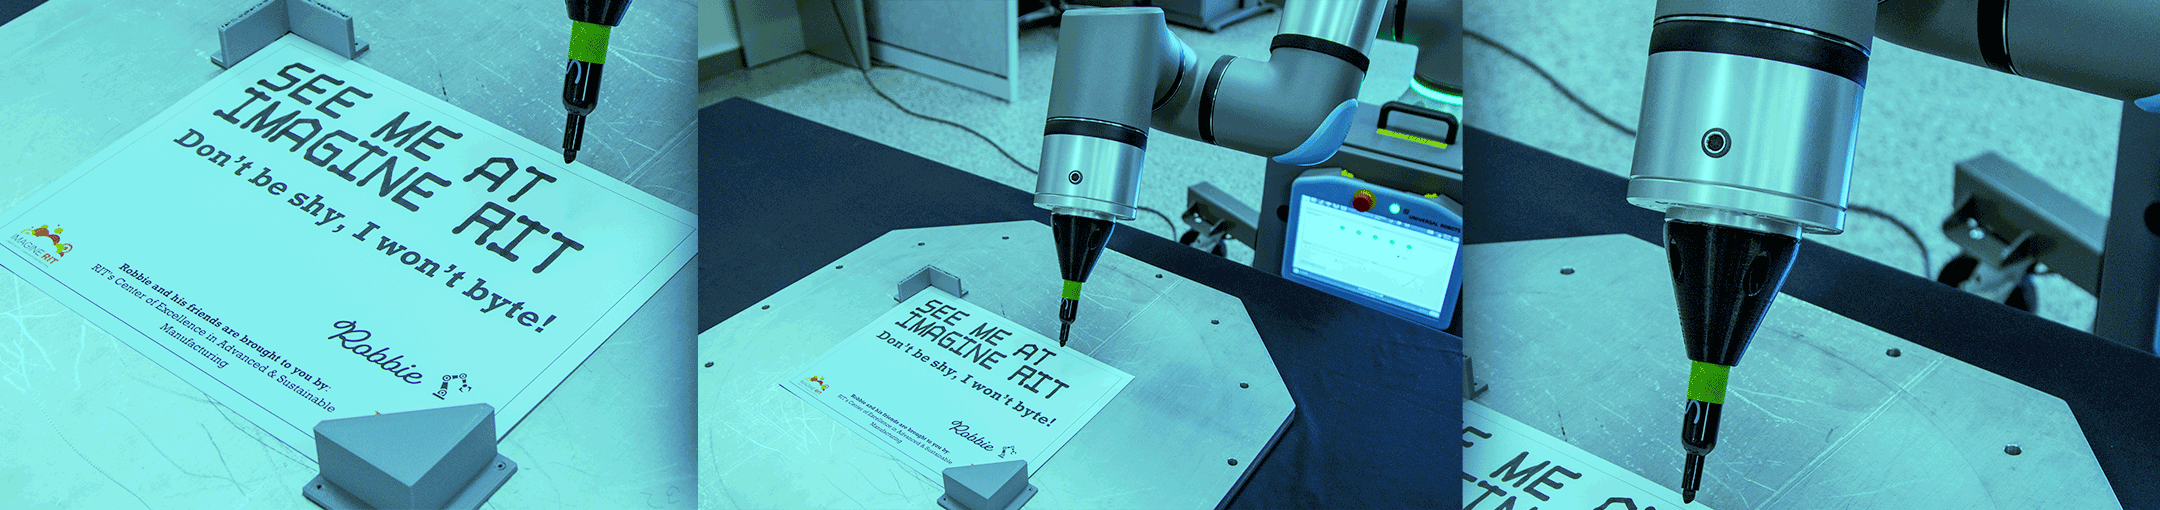 Different close up views of Robbie the Robot writing See Me at Imagine RIT